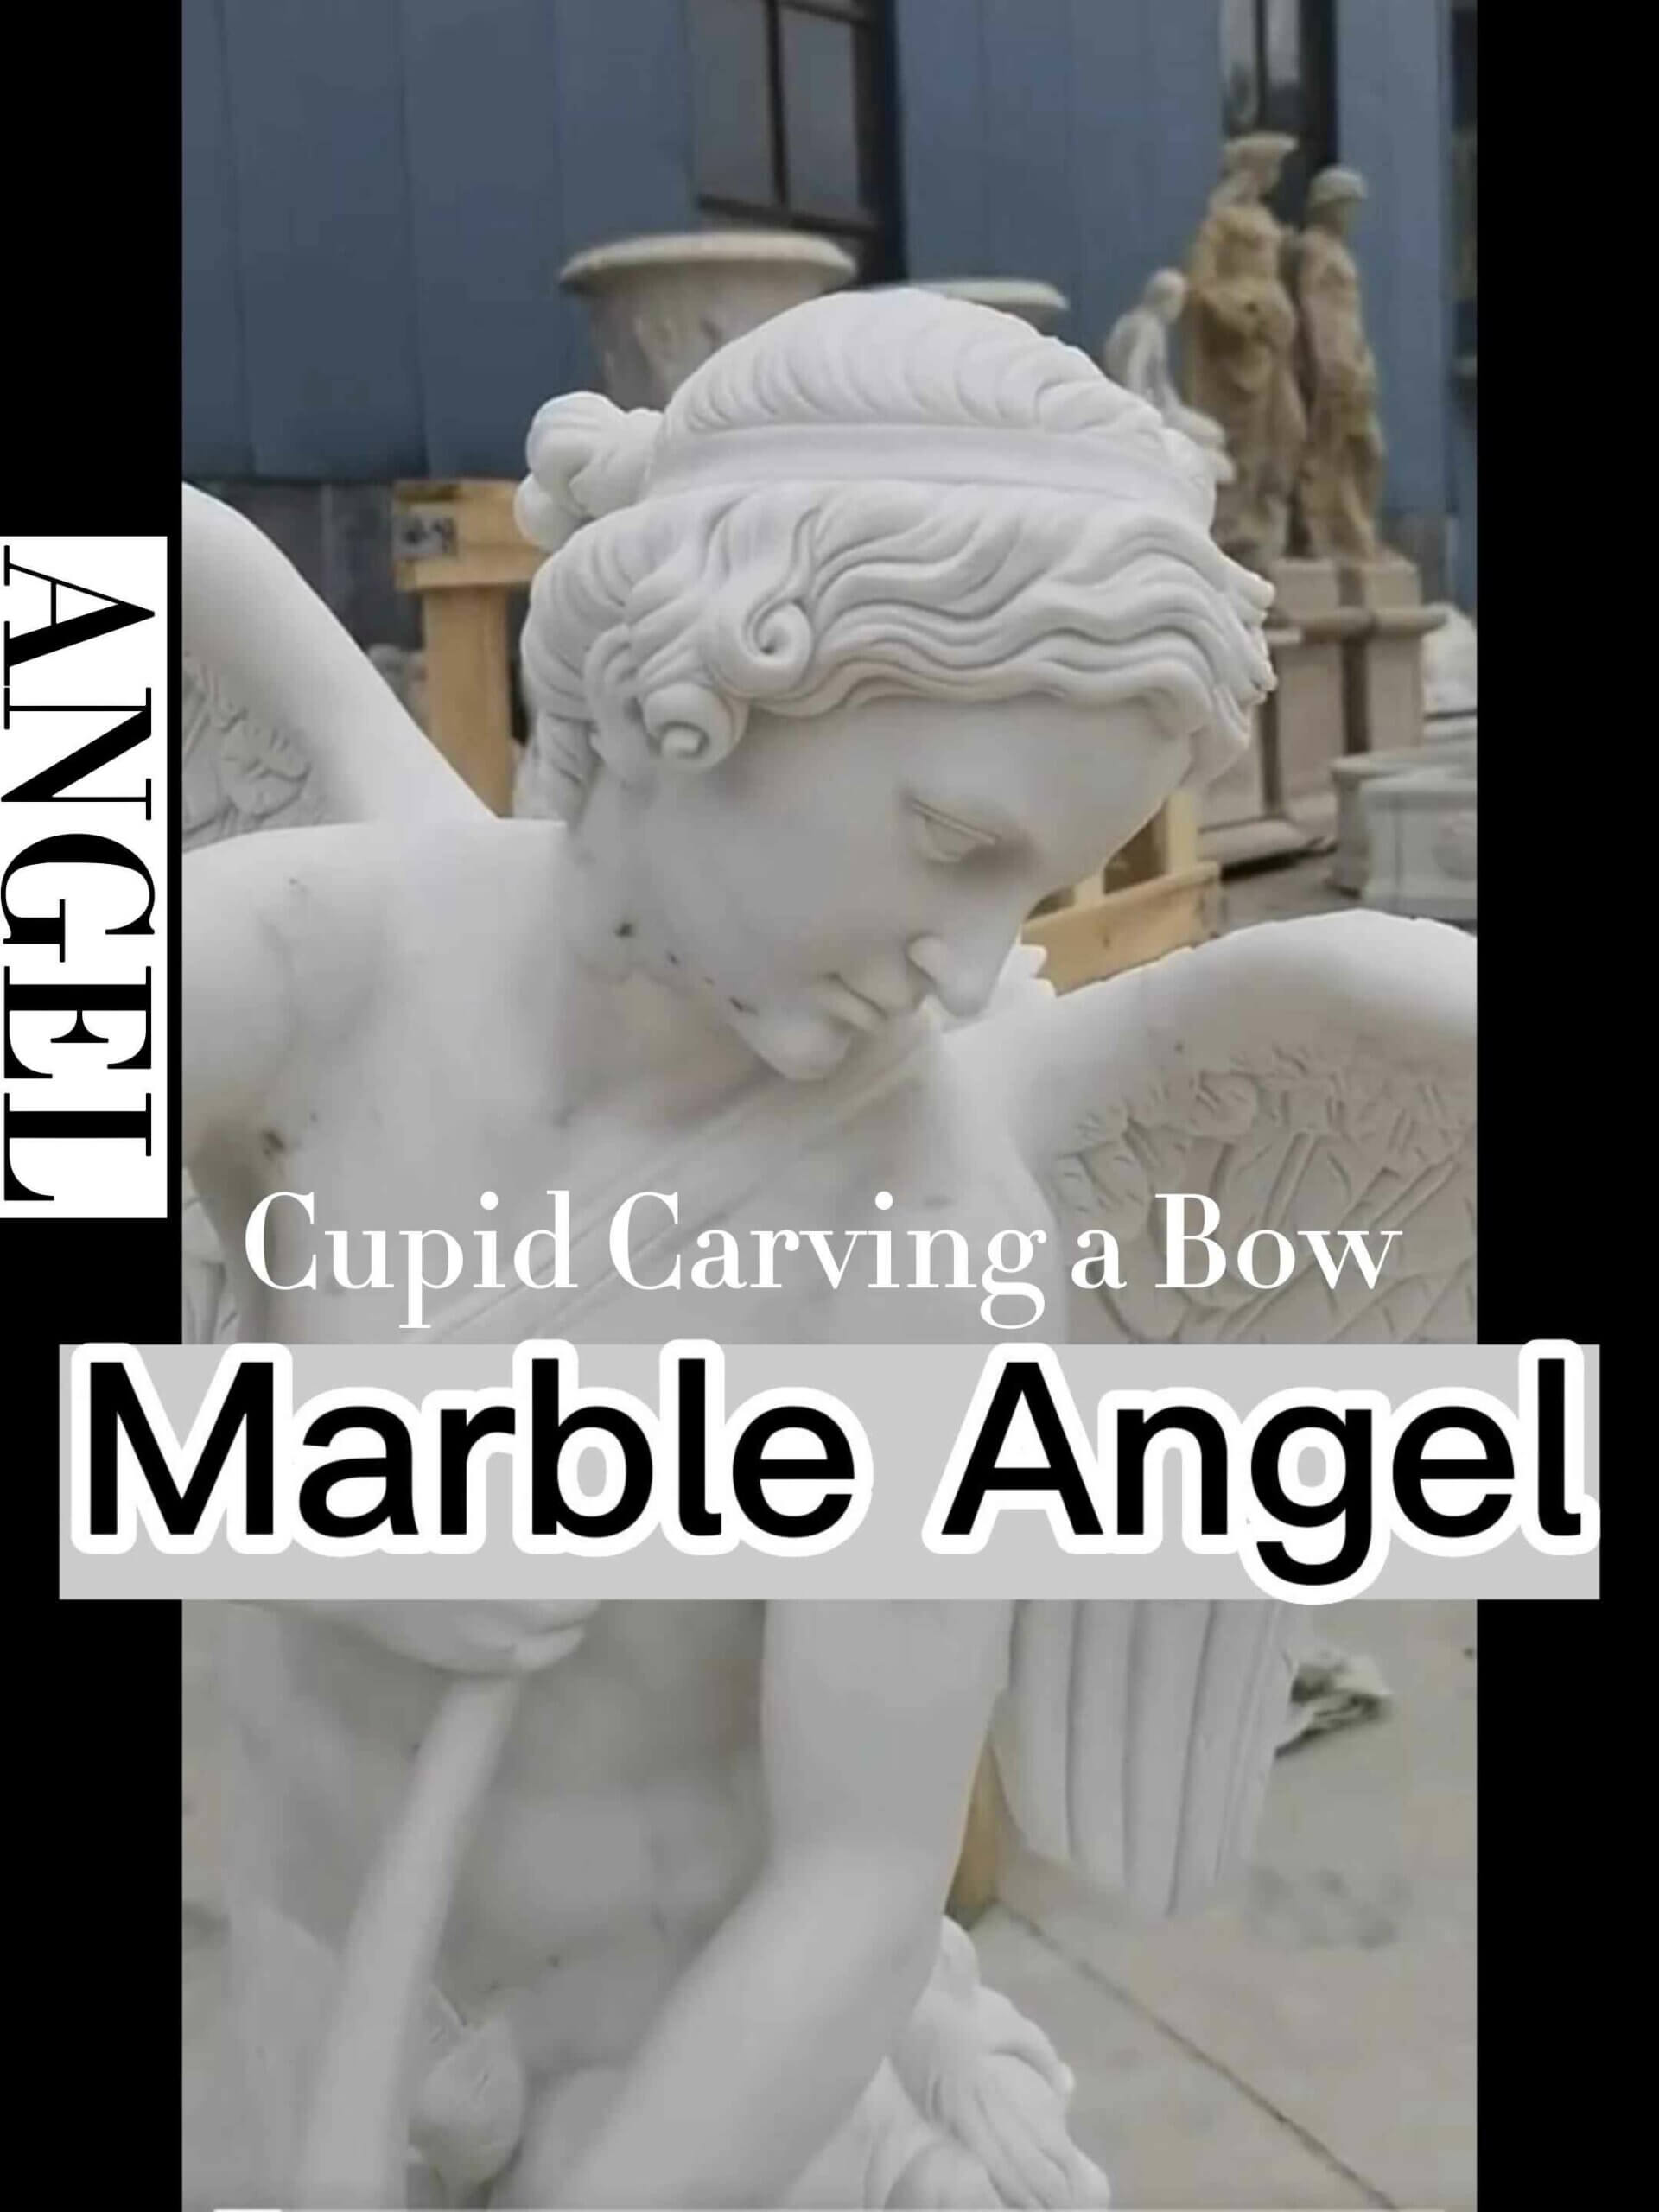 Cupid Carving a Bow marble angel statue